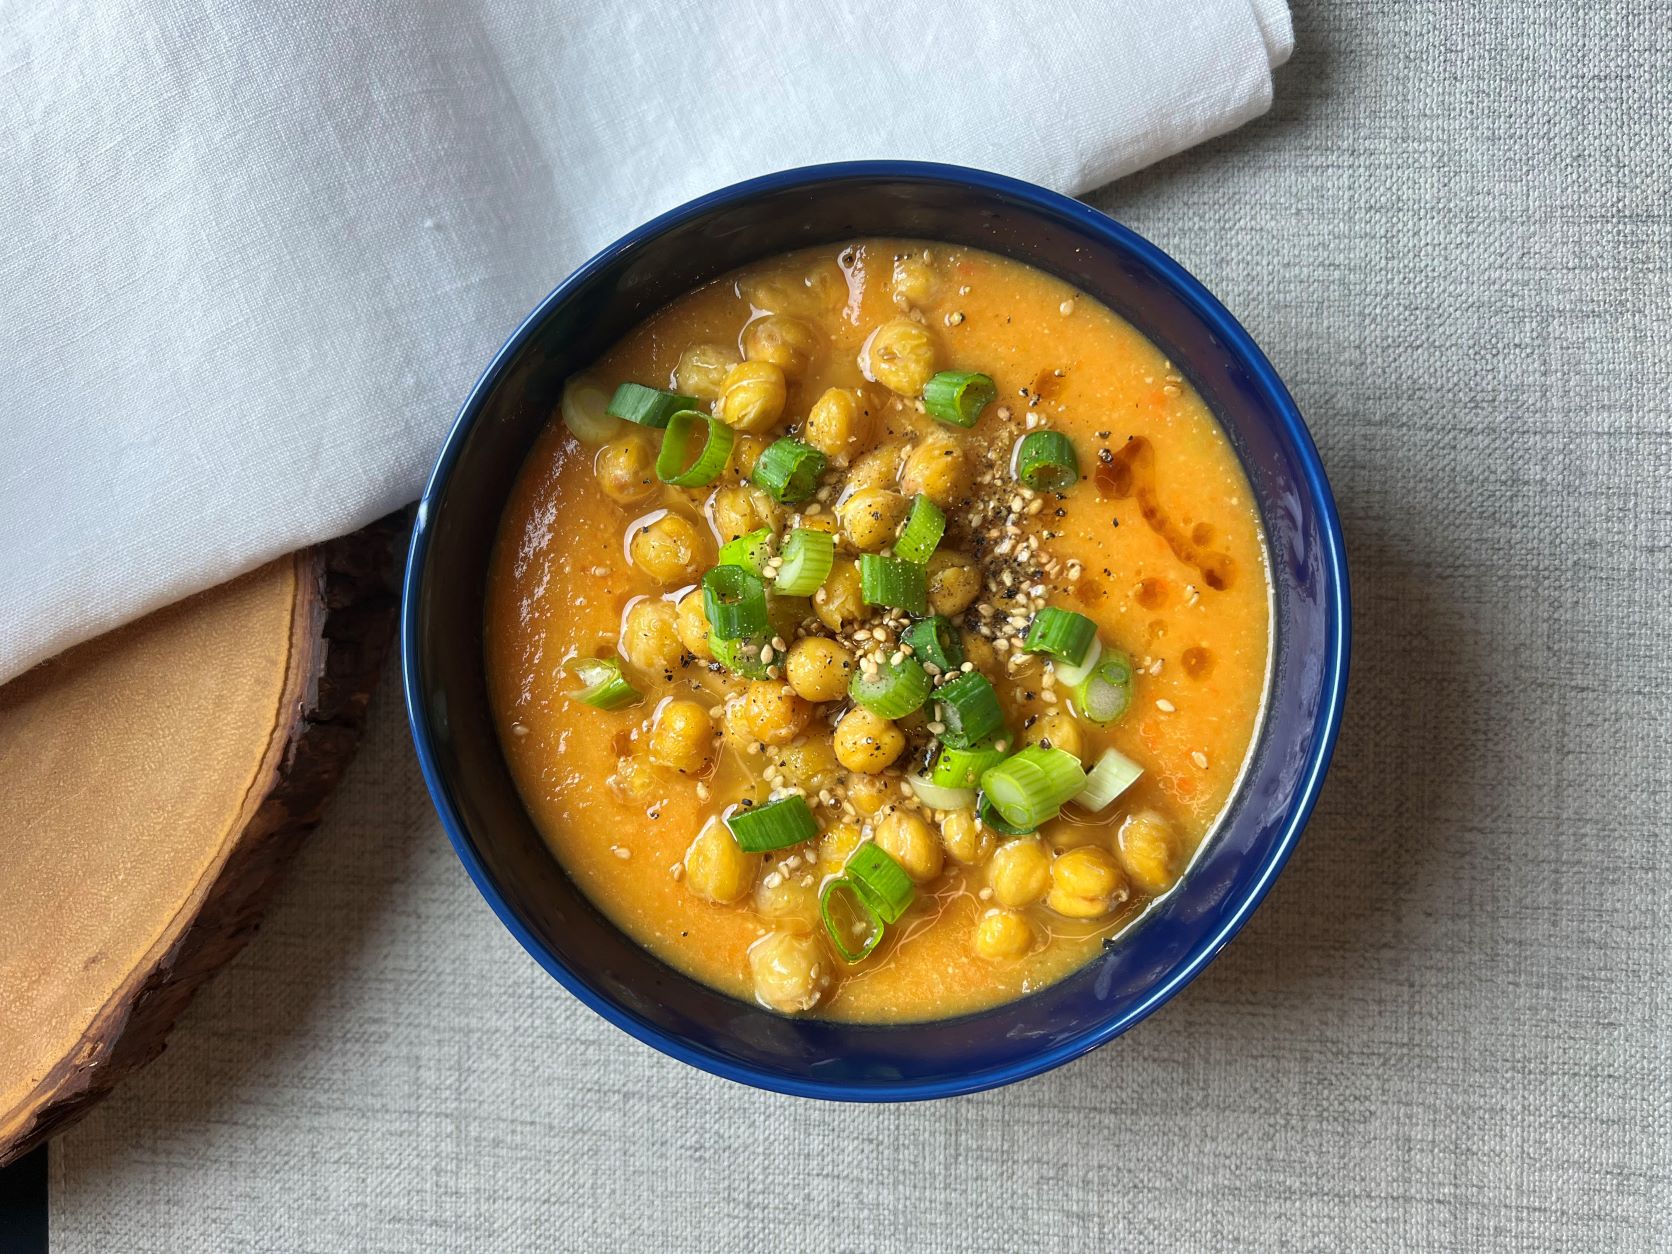 Carrot and Miso Soup with Garlicky Sesame Chickpeas